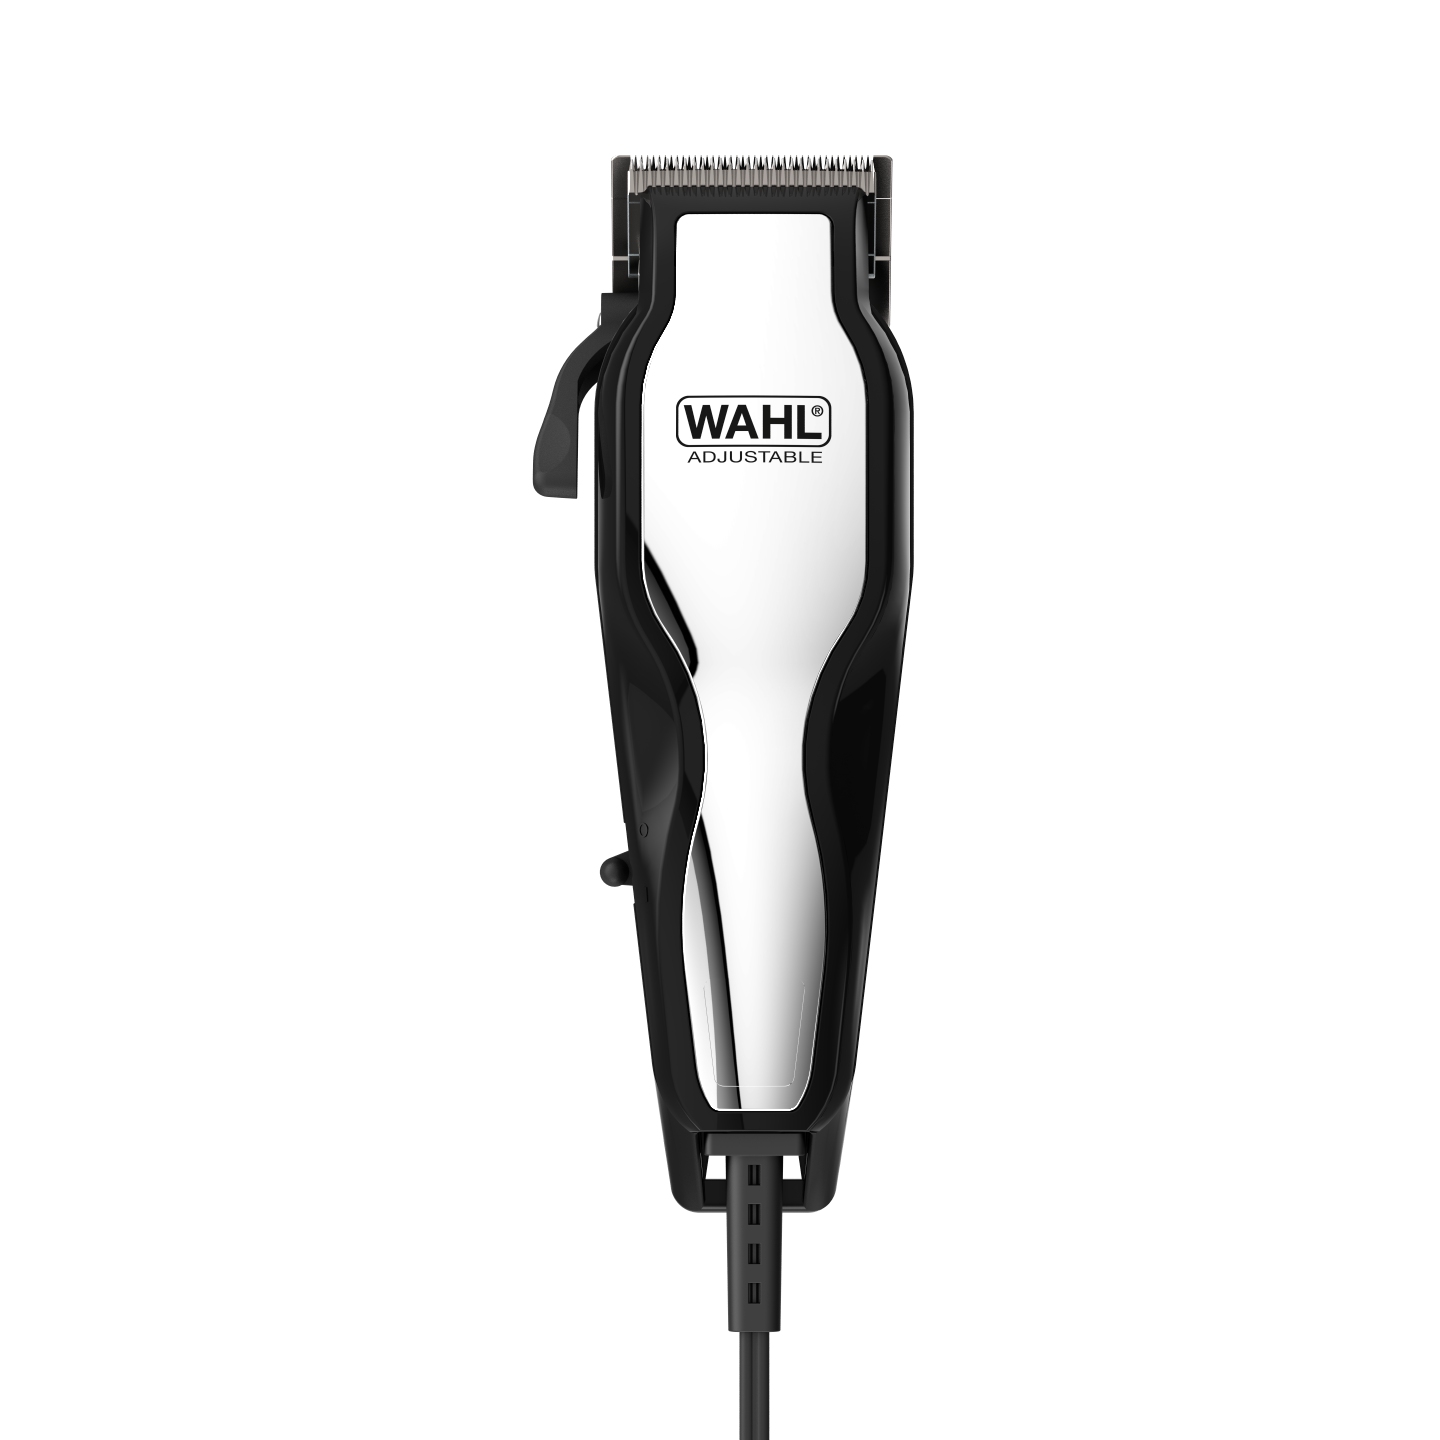 wahl chrome pro men's haircut kit with adjustable taper lever and hard storage case